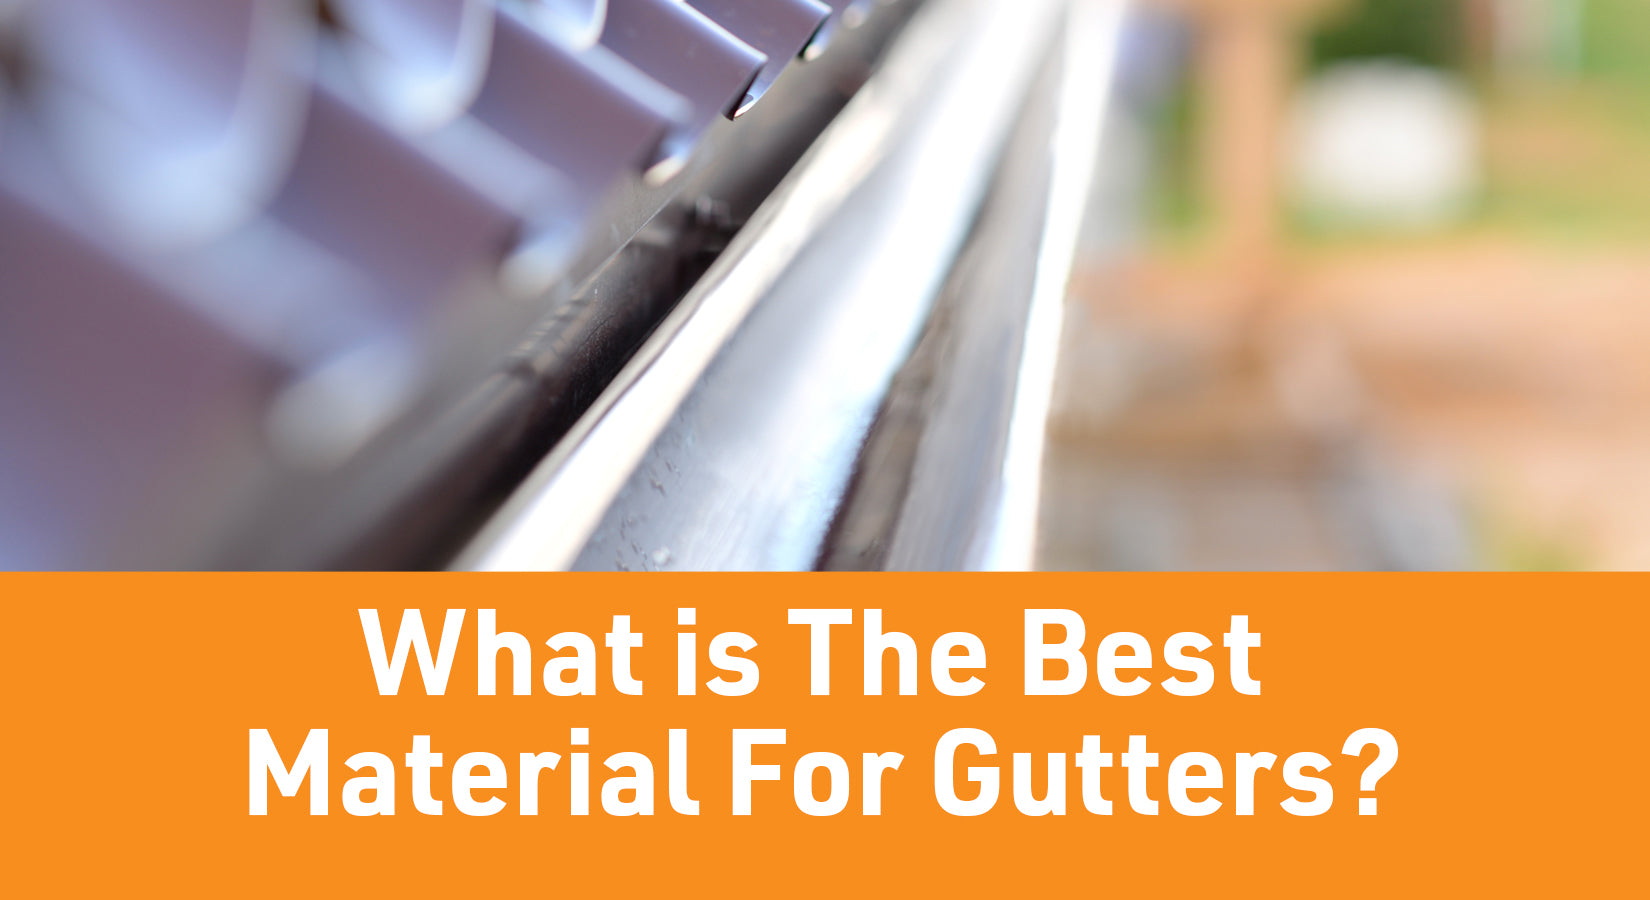 What is the Best Material for Gutters?